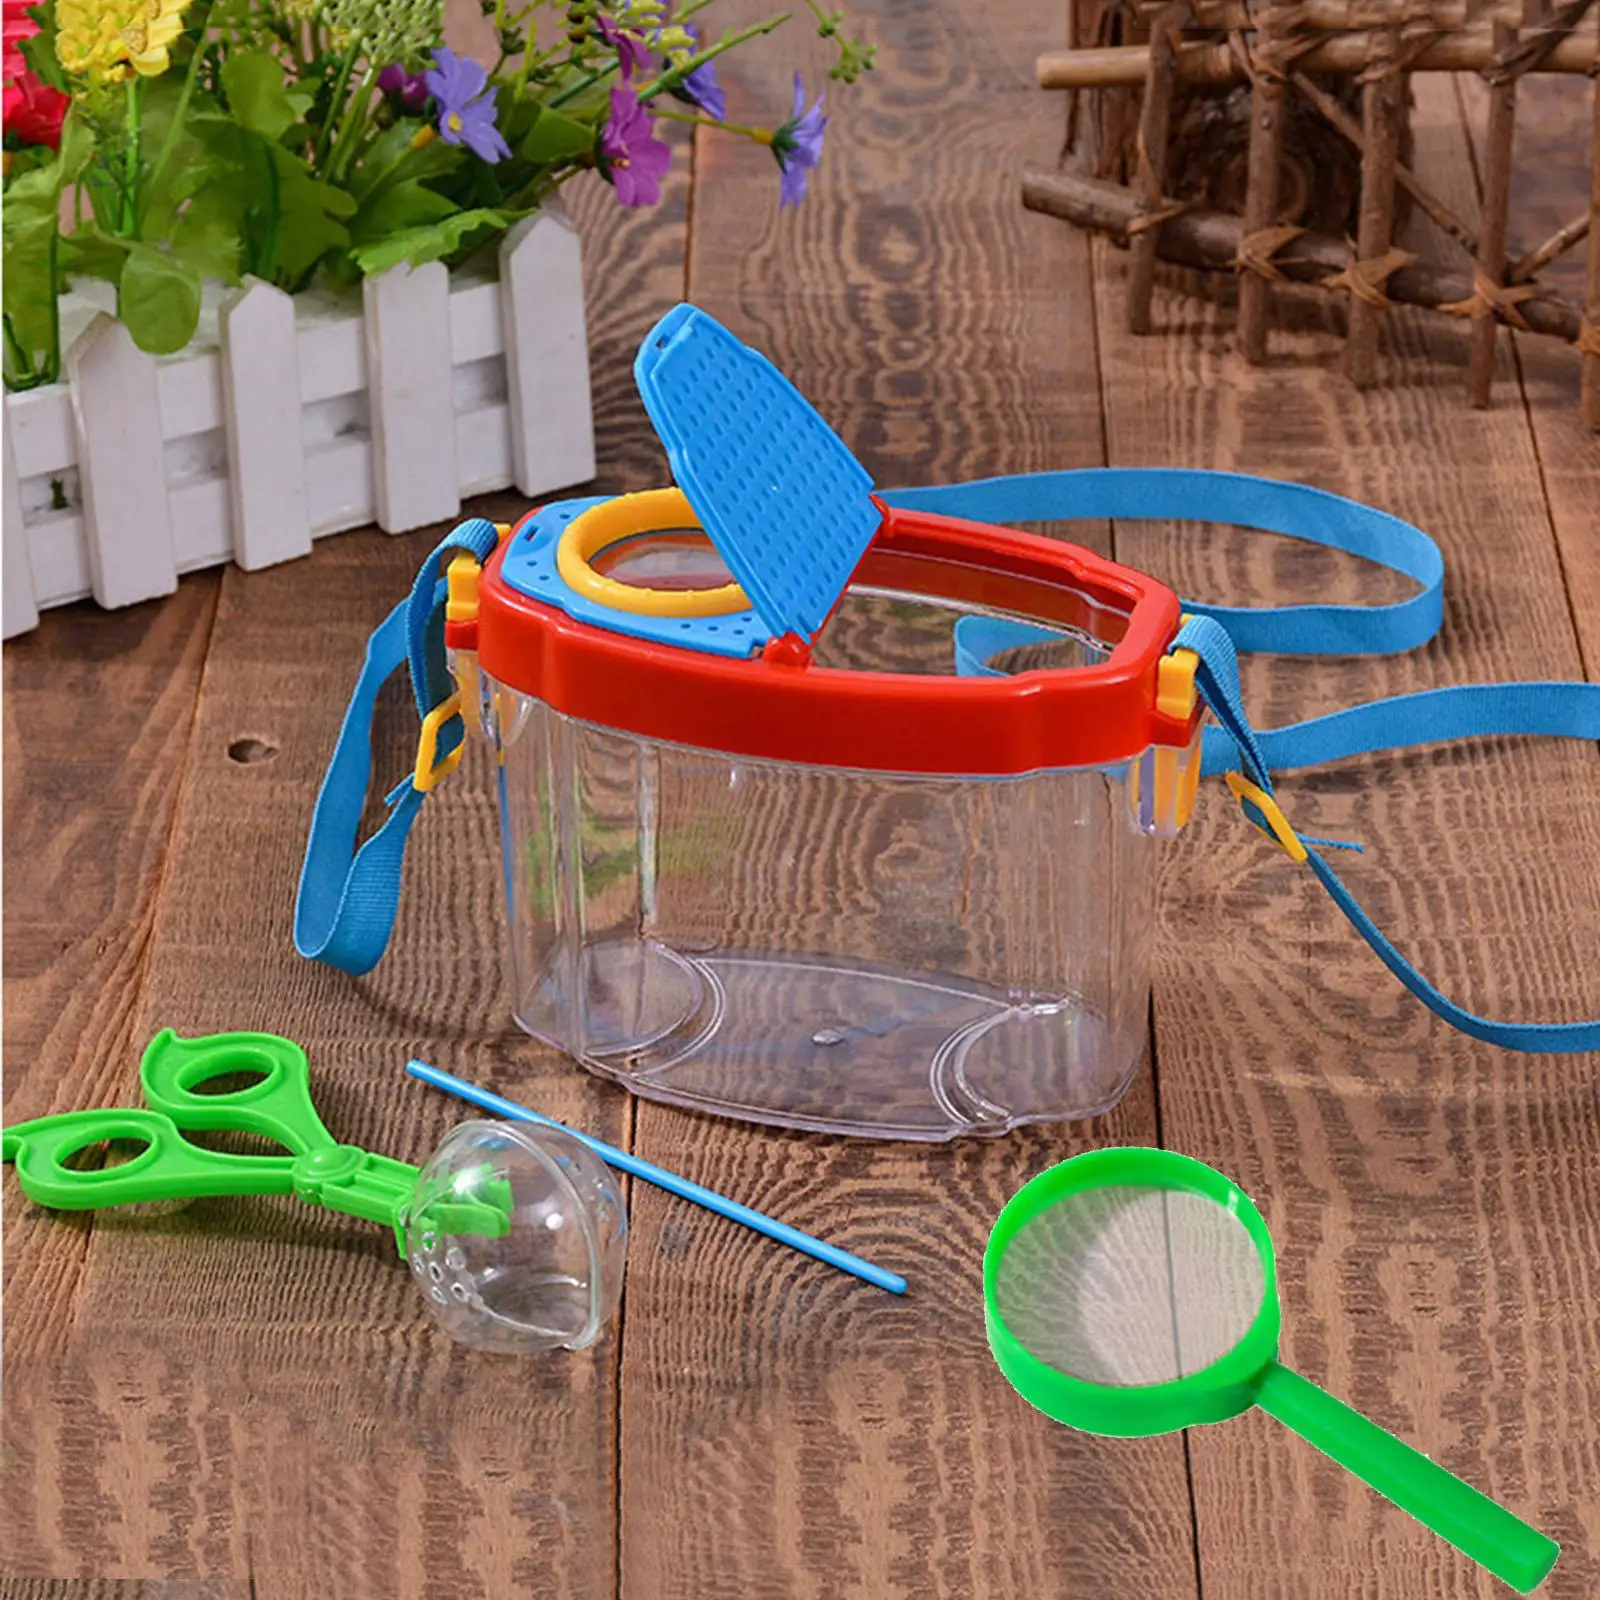 Insert  Viewer   Catcher    Magnifying Jar Collecting Kit  Container Case  Exploration